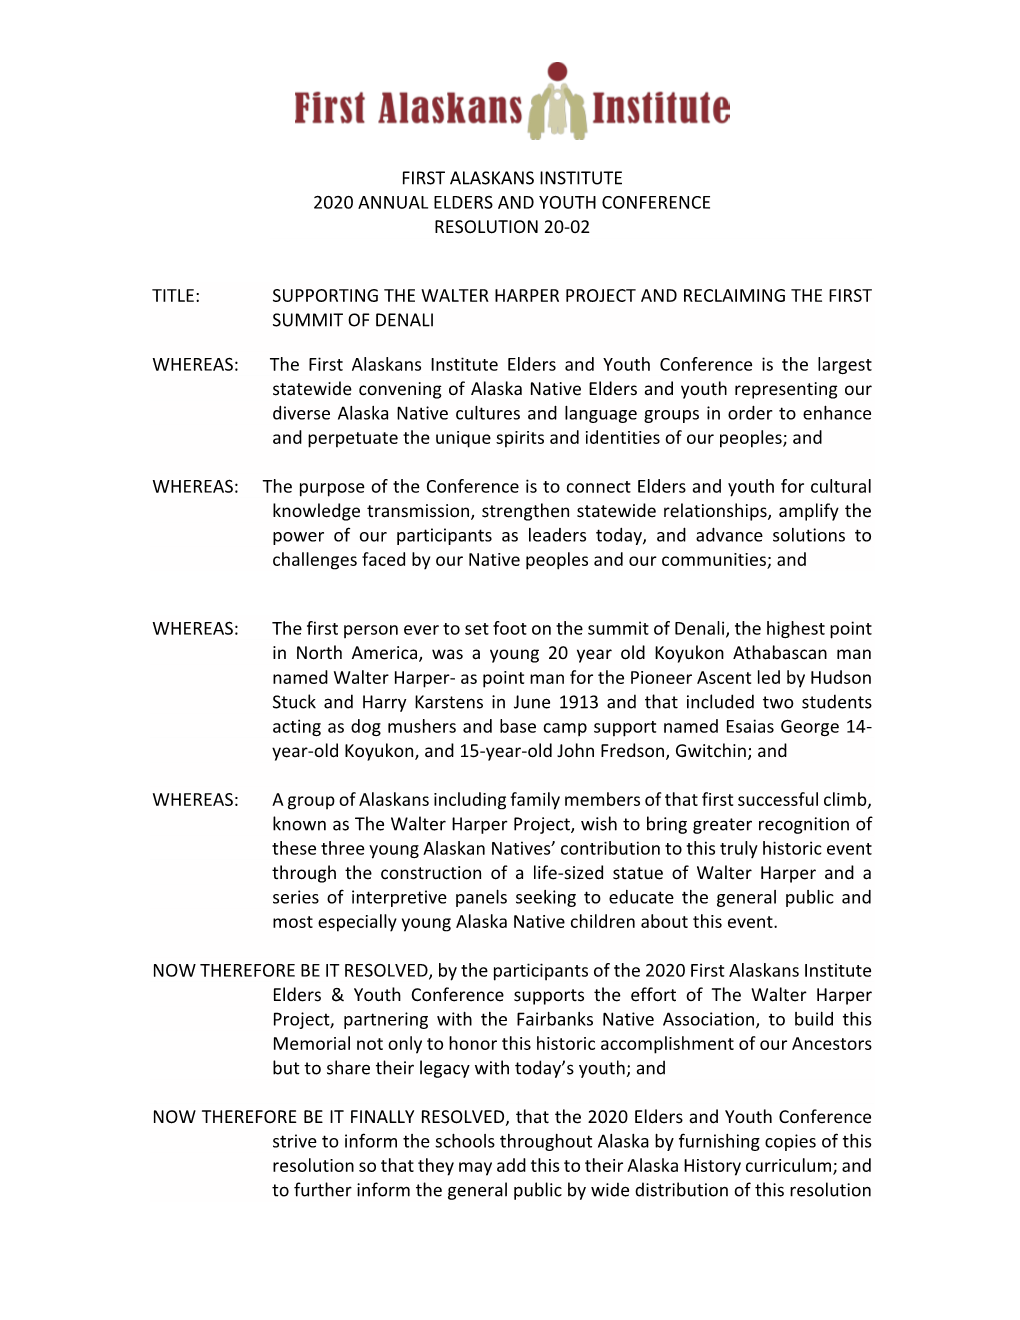 First Alaskans Institute 2020 Annual Elders and Youth Conference Resolution 20-02